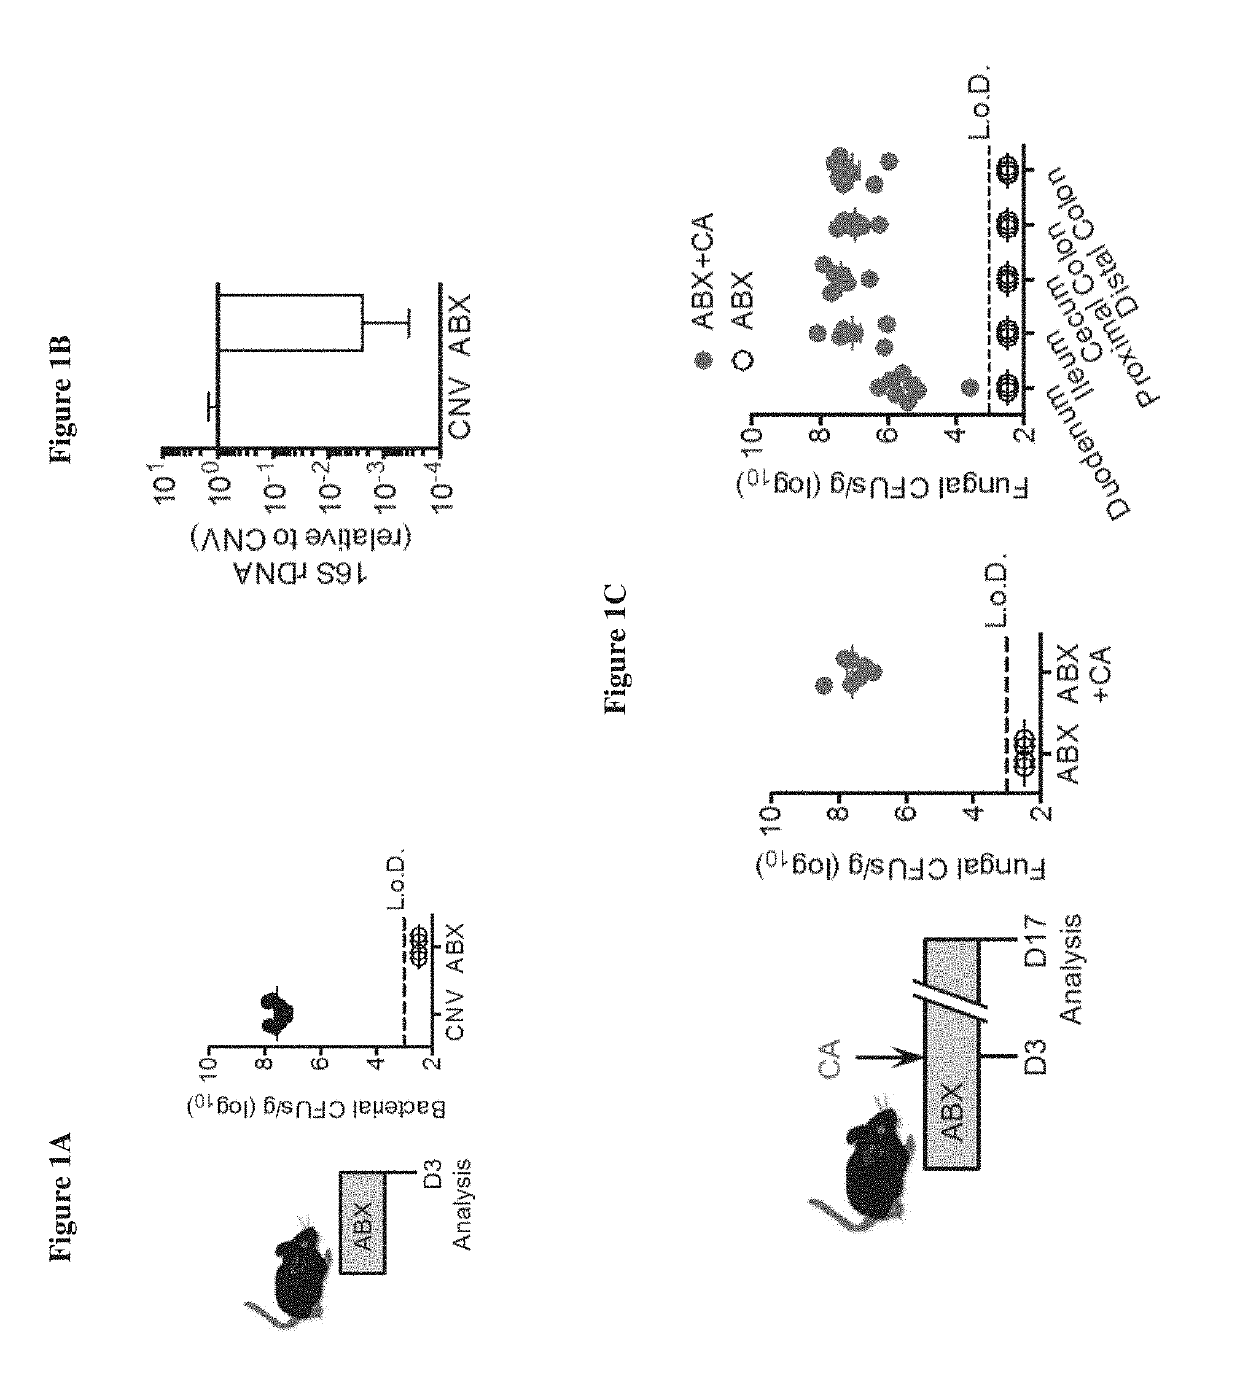 Commensal fungi and components thereof for use in modulating immune responses